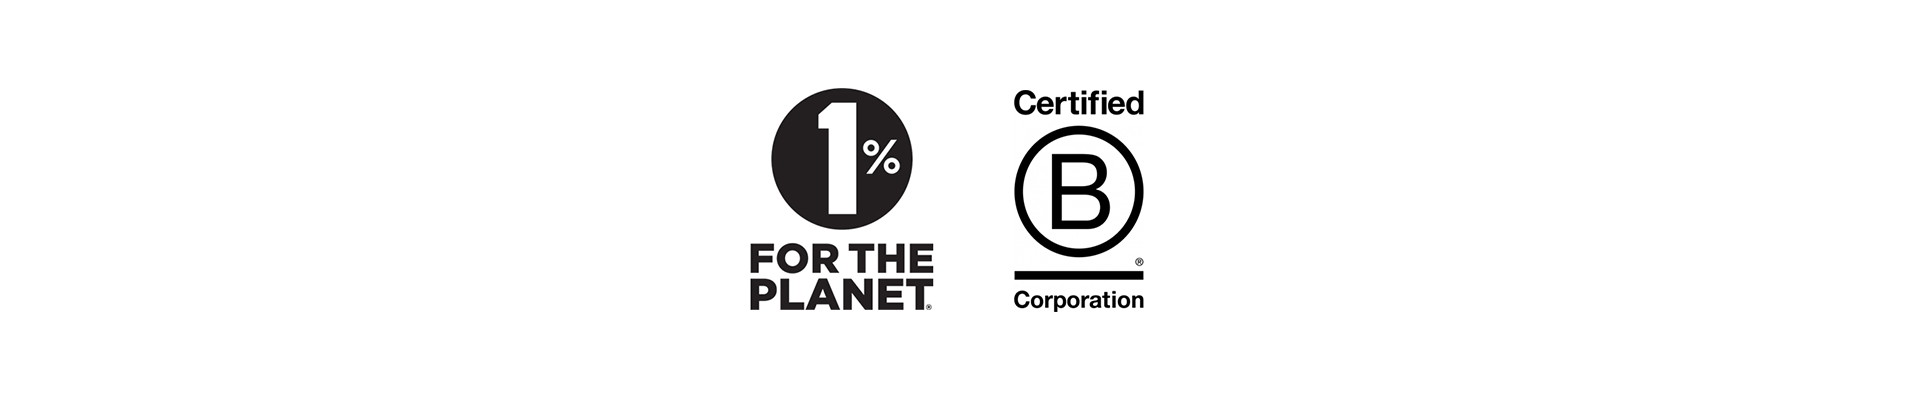 1 % for the Planet and B Corp logos